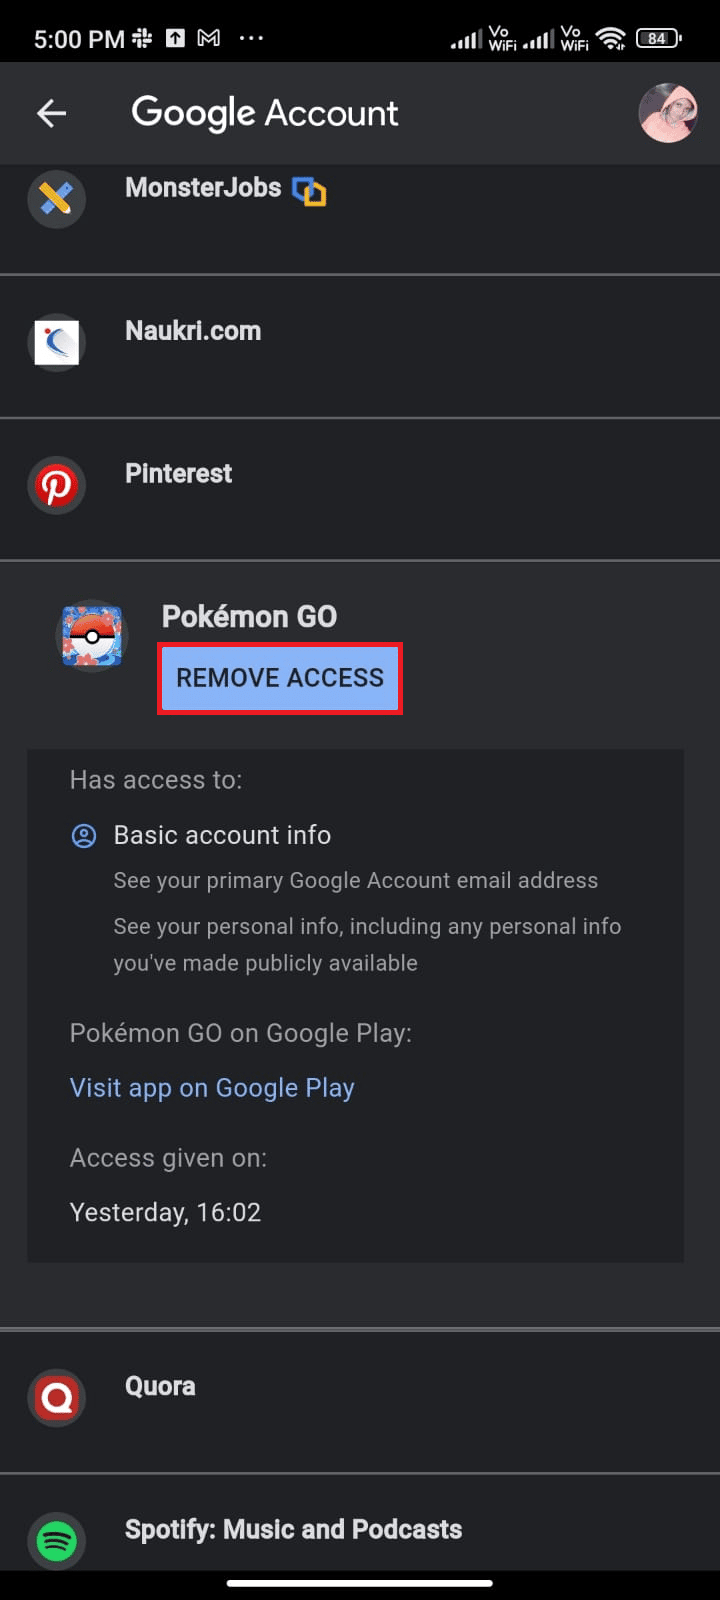 Now, scroll down to the next screen and tap on REMOVE ACCESS corresponding to Pokémon Go. fix Pokémon Go adventure sync not working